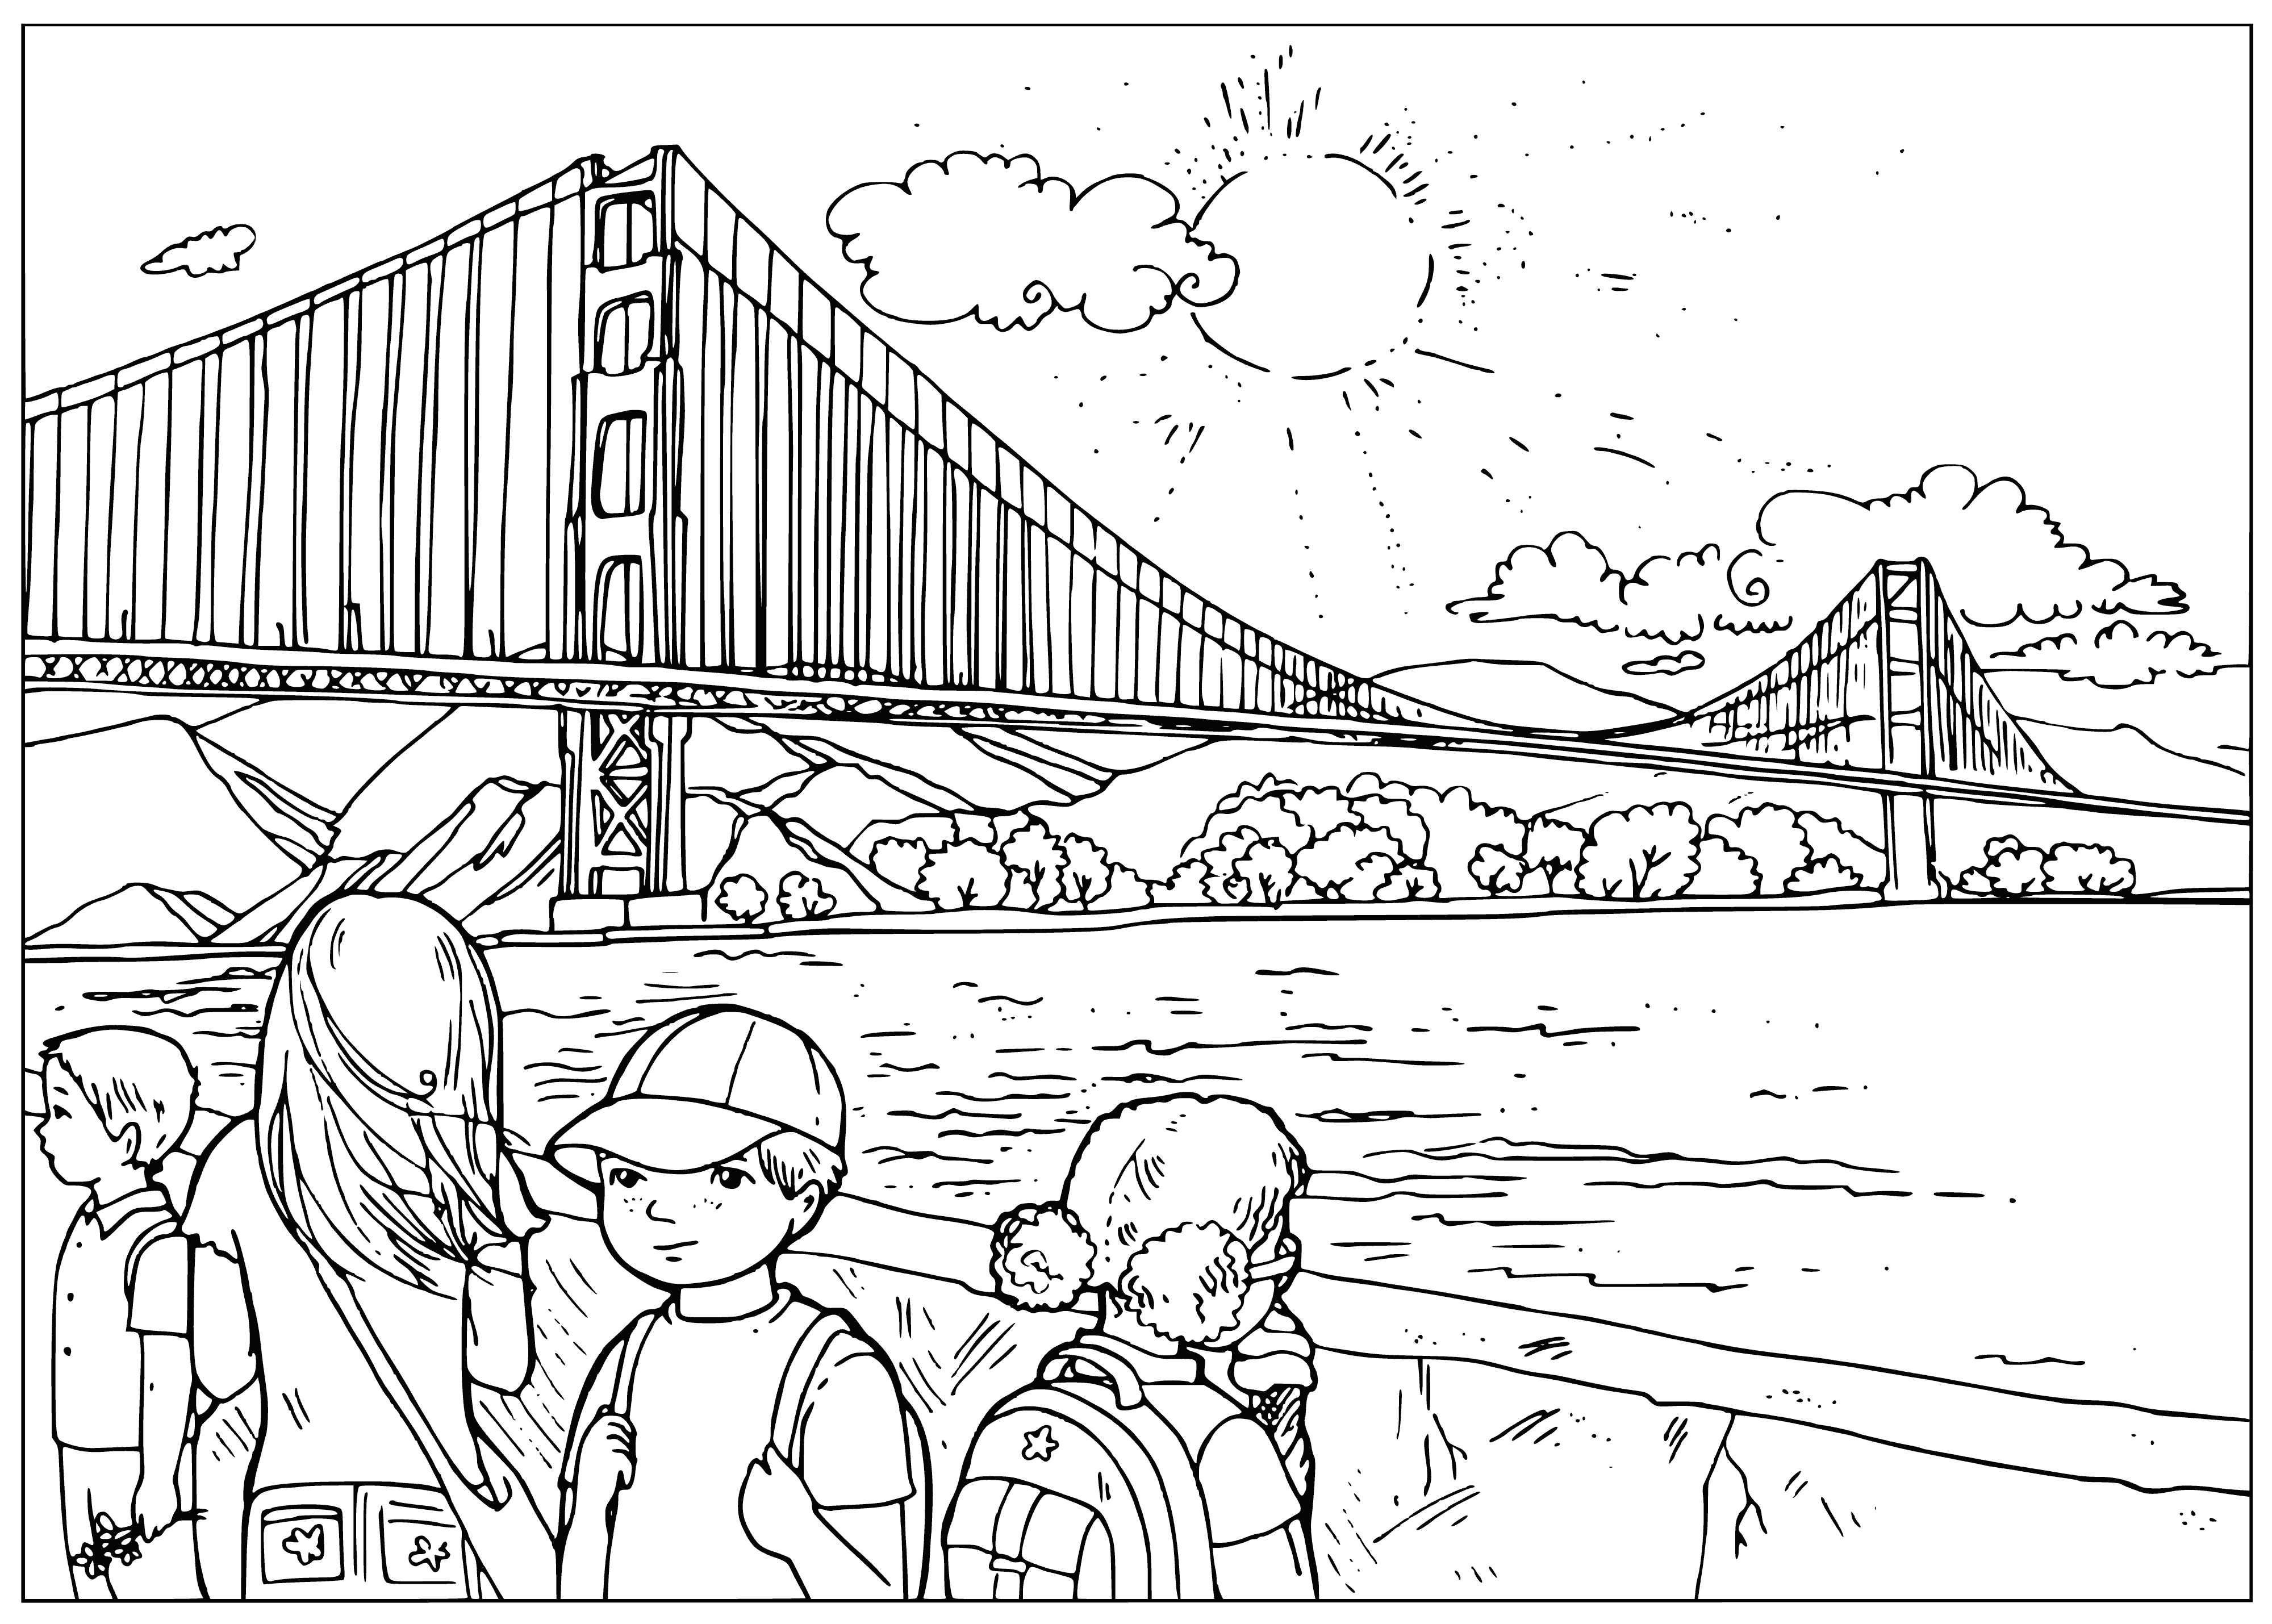 coloring page: The Golden Gate Bridge is an iconic U.S. landmark, spanning from the Pacific Ocean to the San Francisco Bay. Built in 1937, it is one of the world's most coloring pagegraphed bridges.